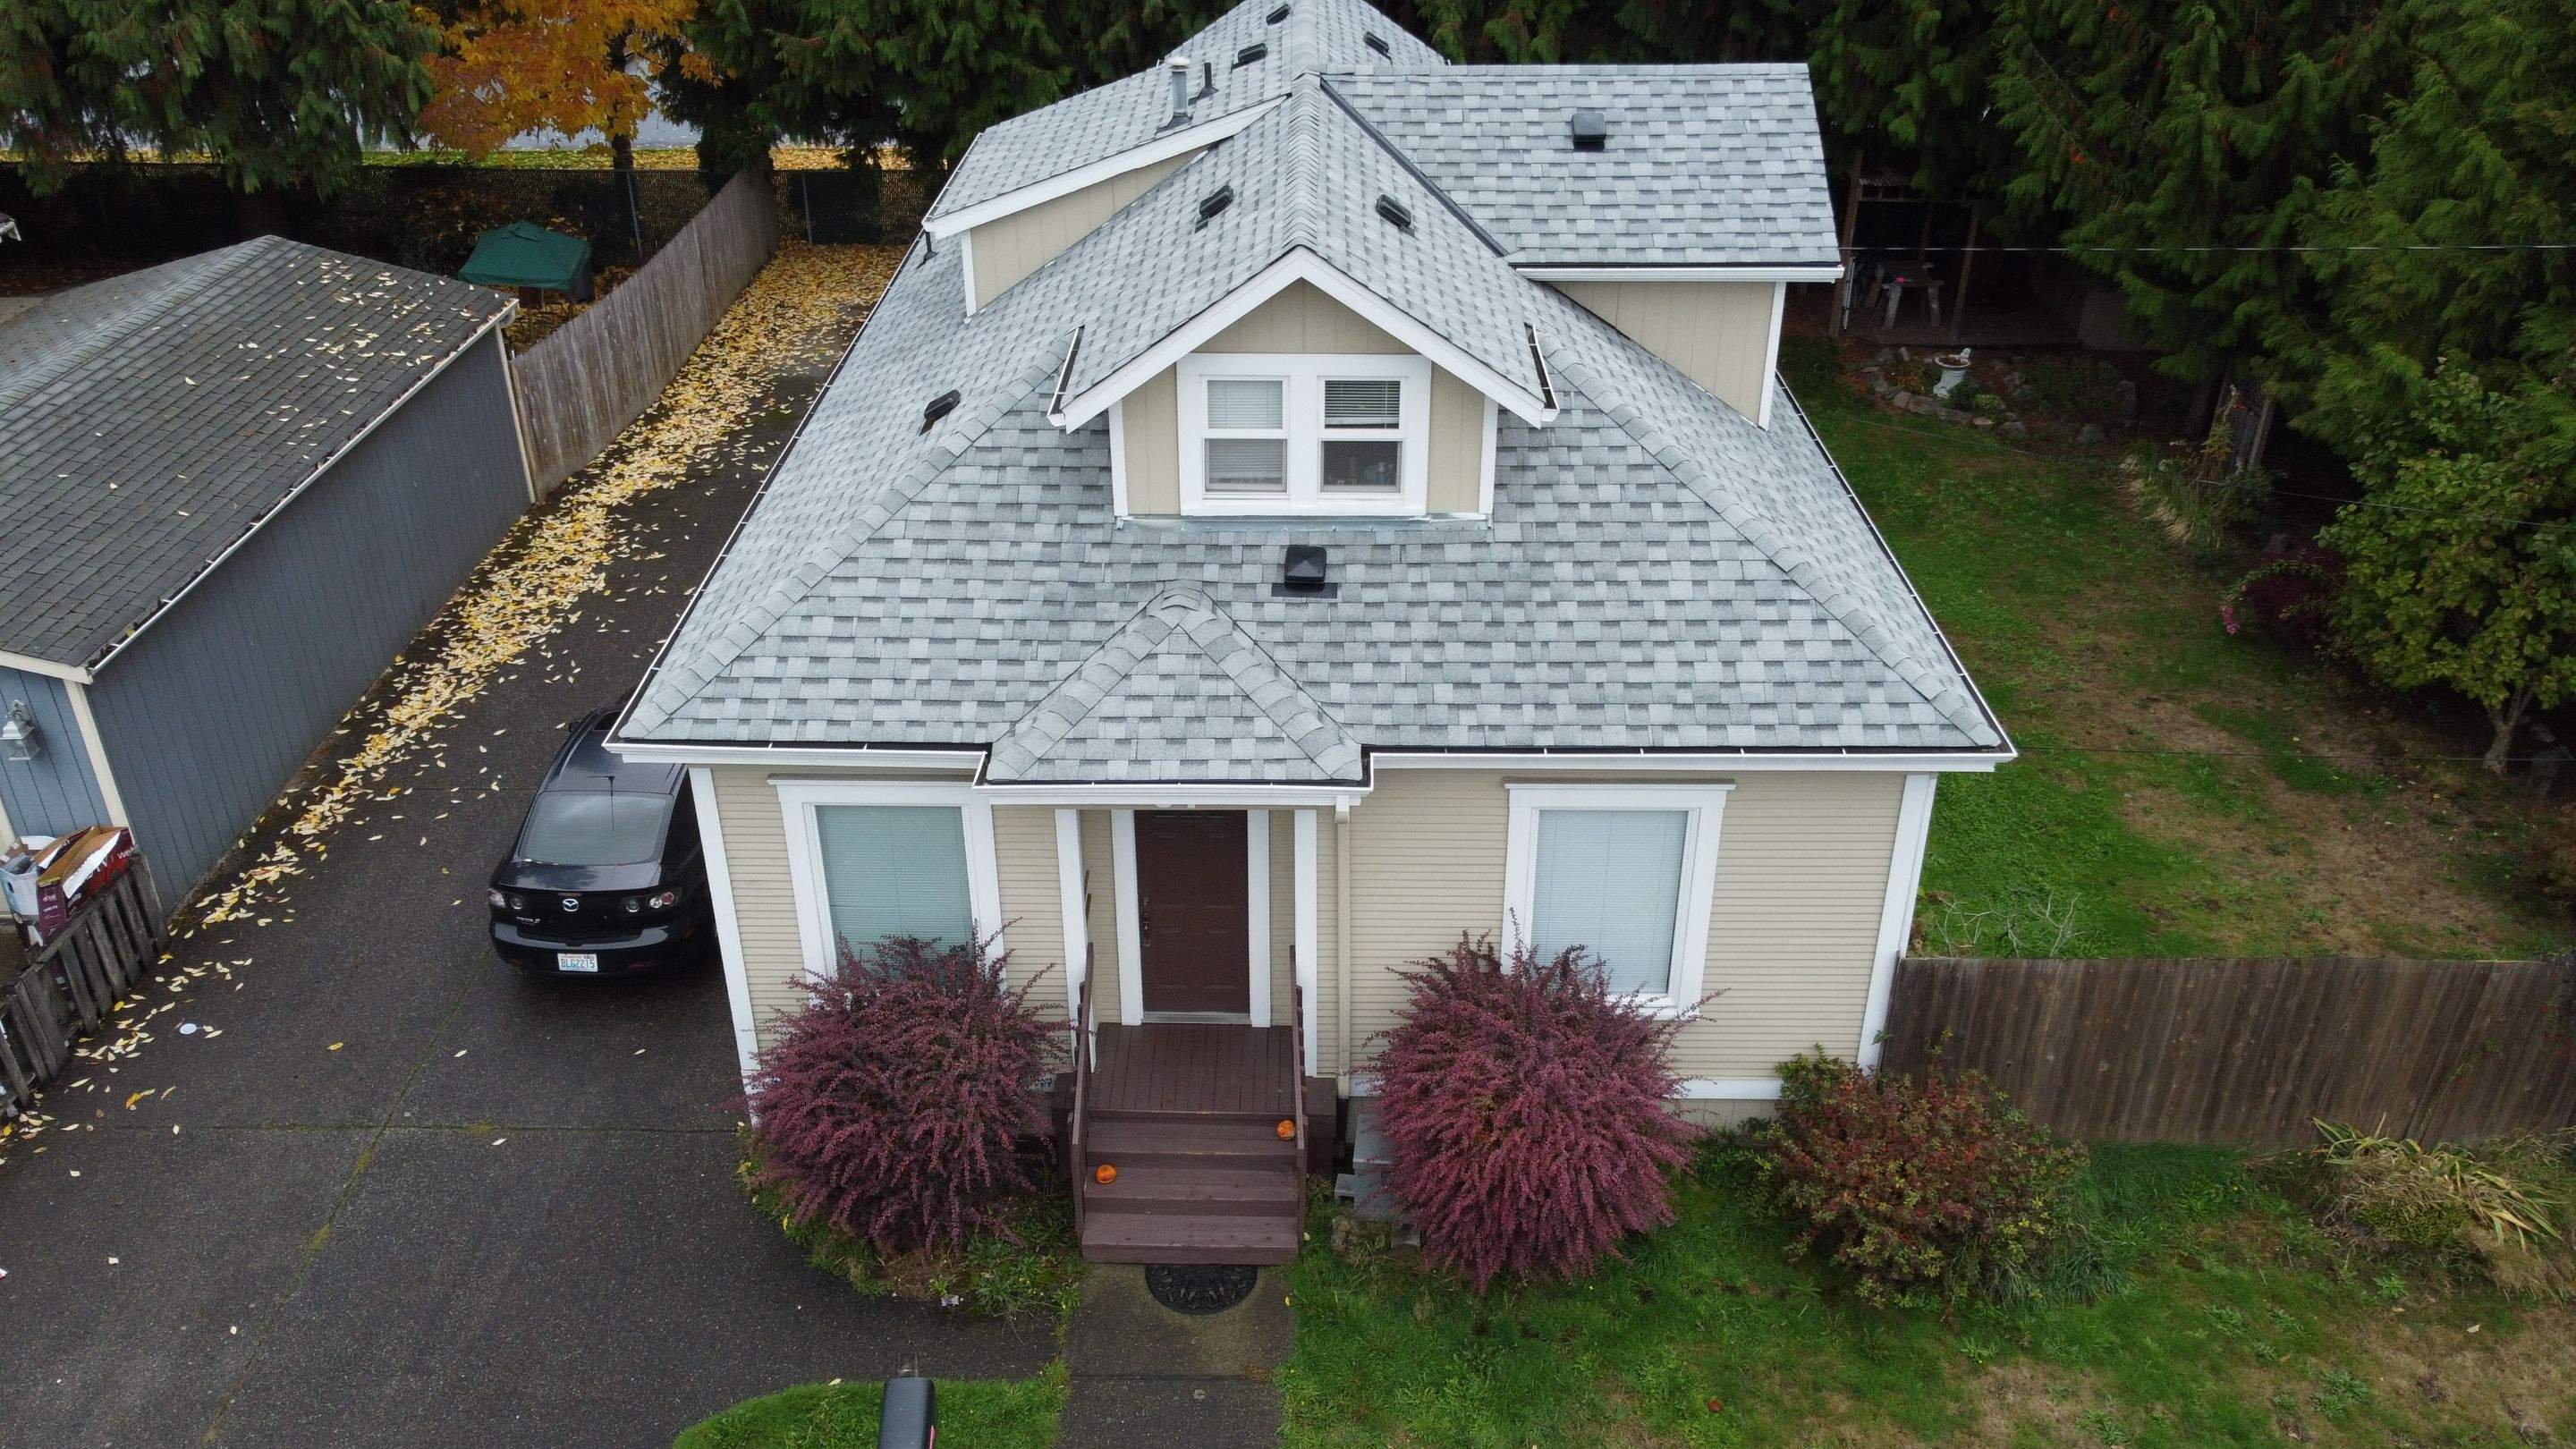 Completed Residential roofing in greater seattle with White to grey shingles. Residential Roof The Benefits of Energy-Efficient